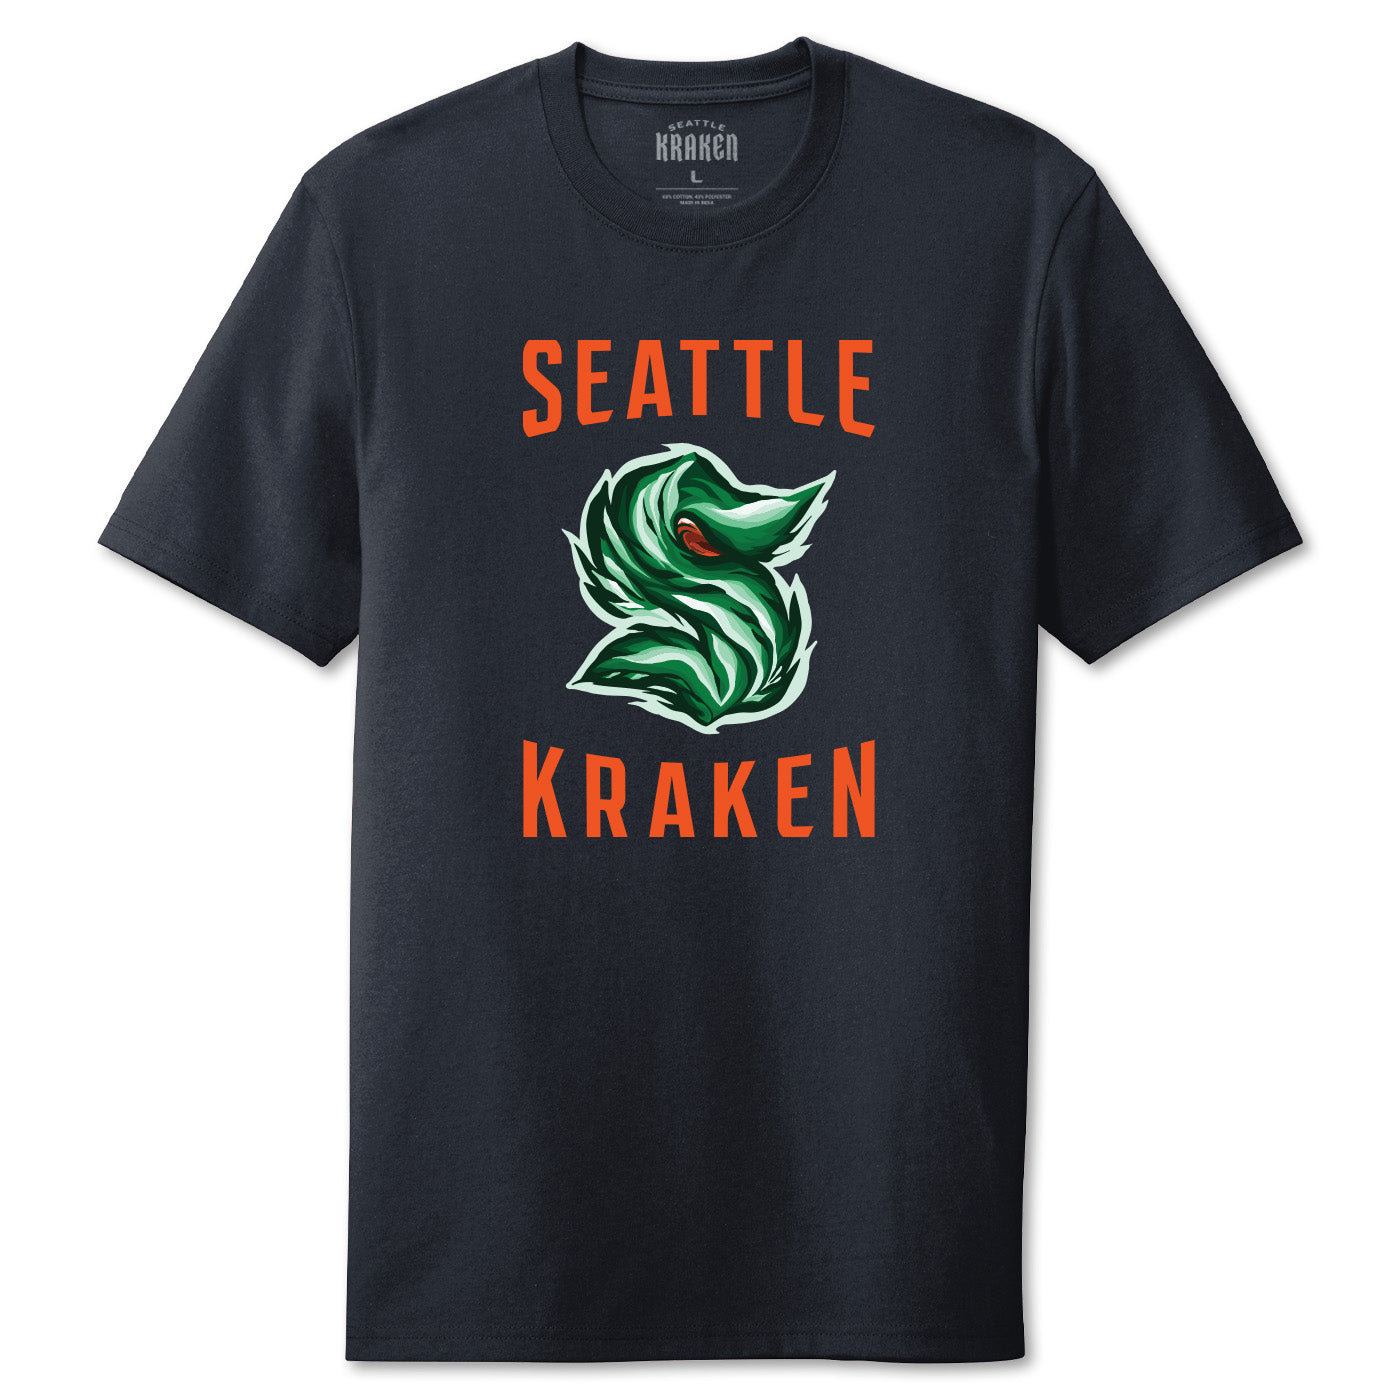 Kraken will wear warmup jerseys Saturday to honor the Year of the